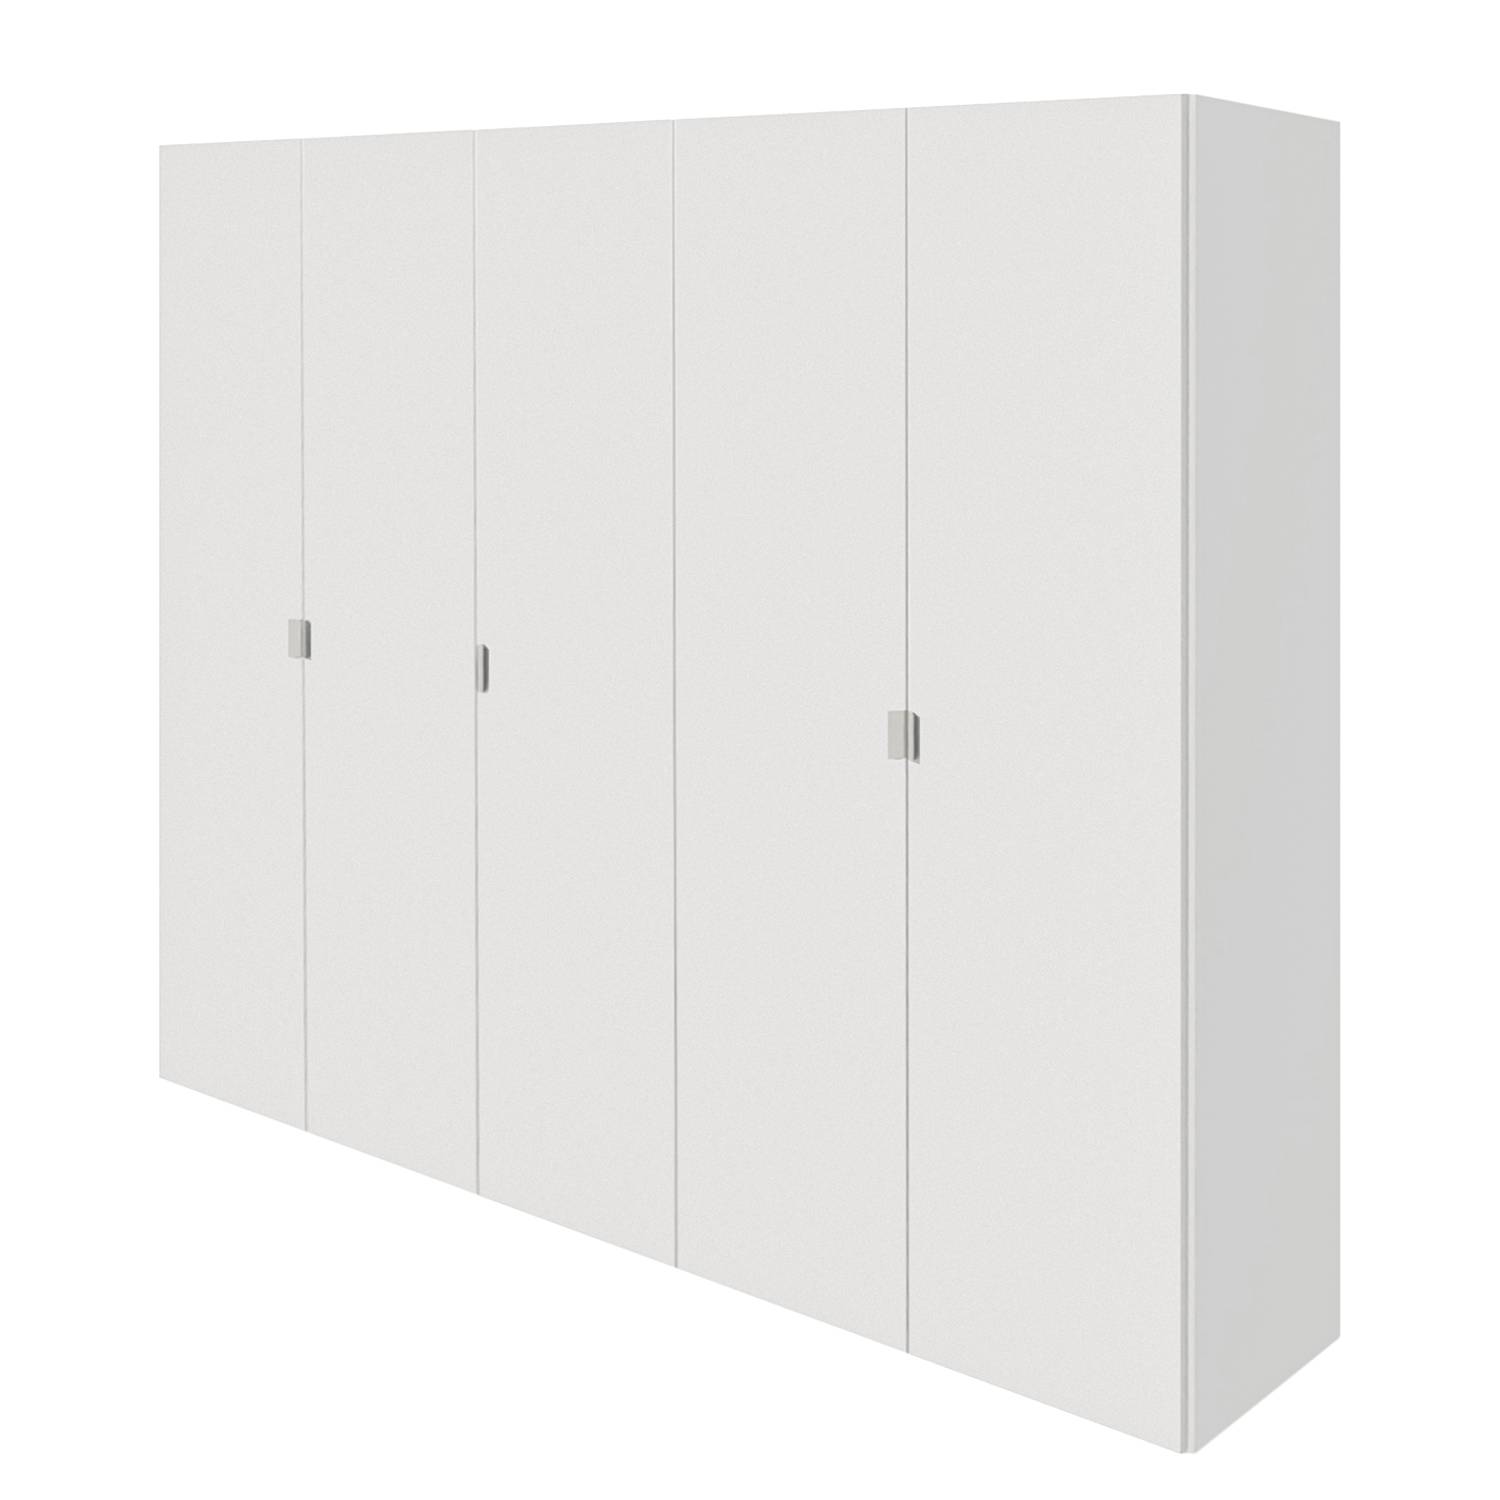 Image of Armoire huelsta now basic 000000001000190302